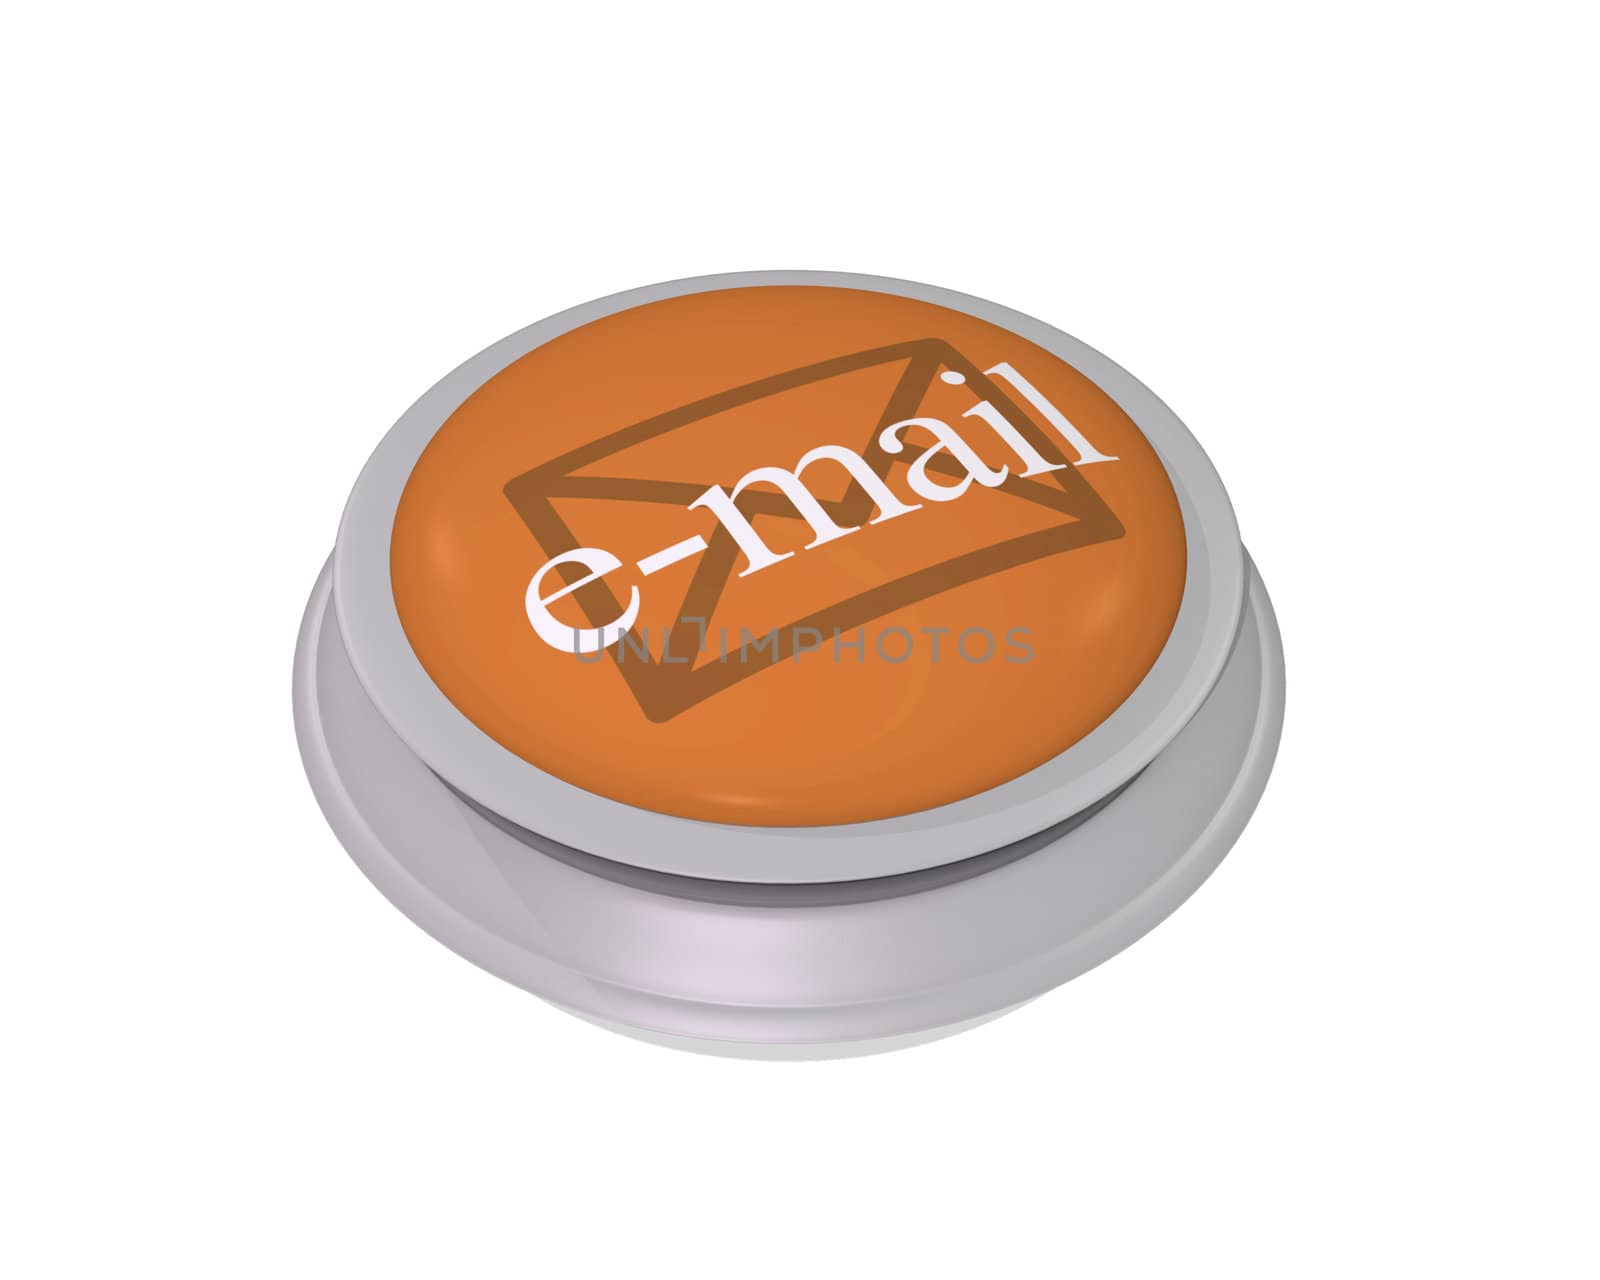 E-mail Button by nmarques74